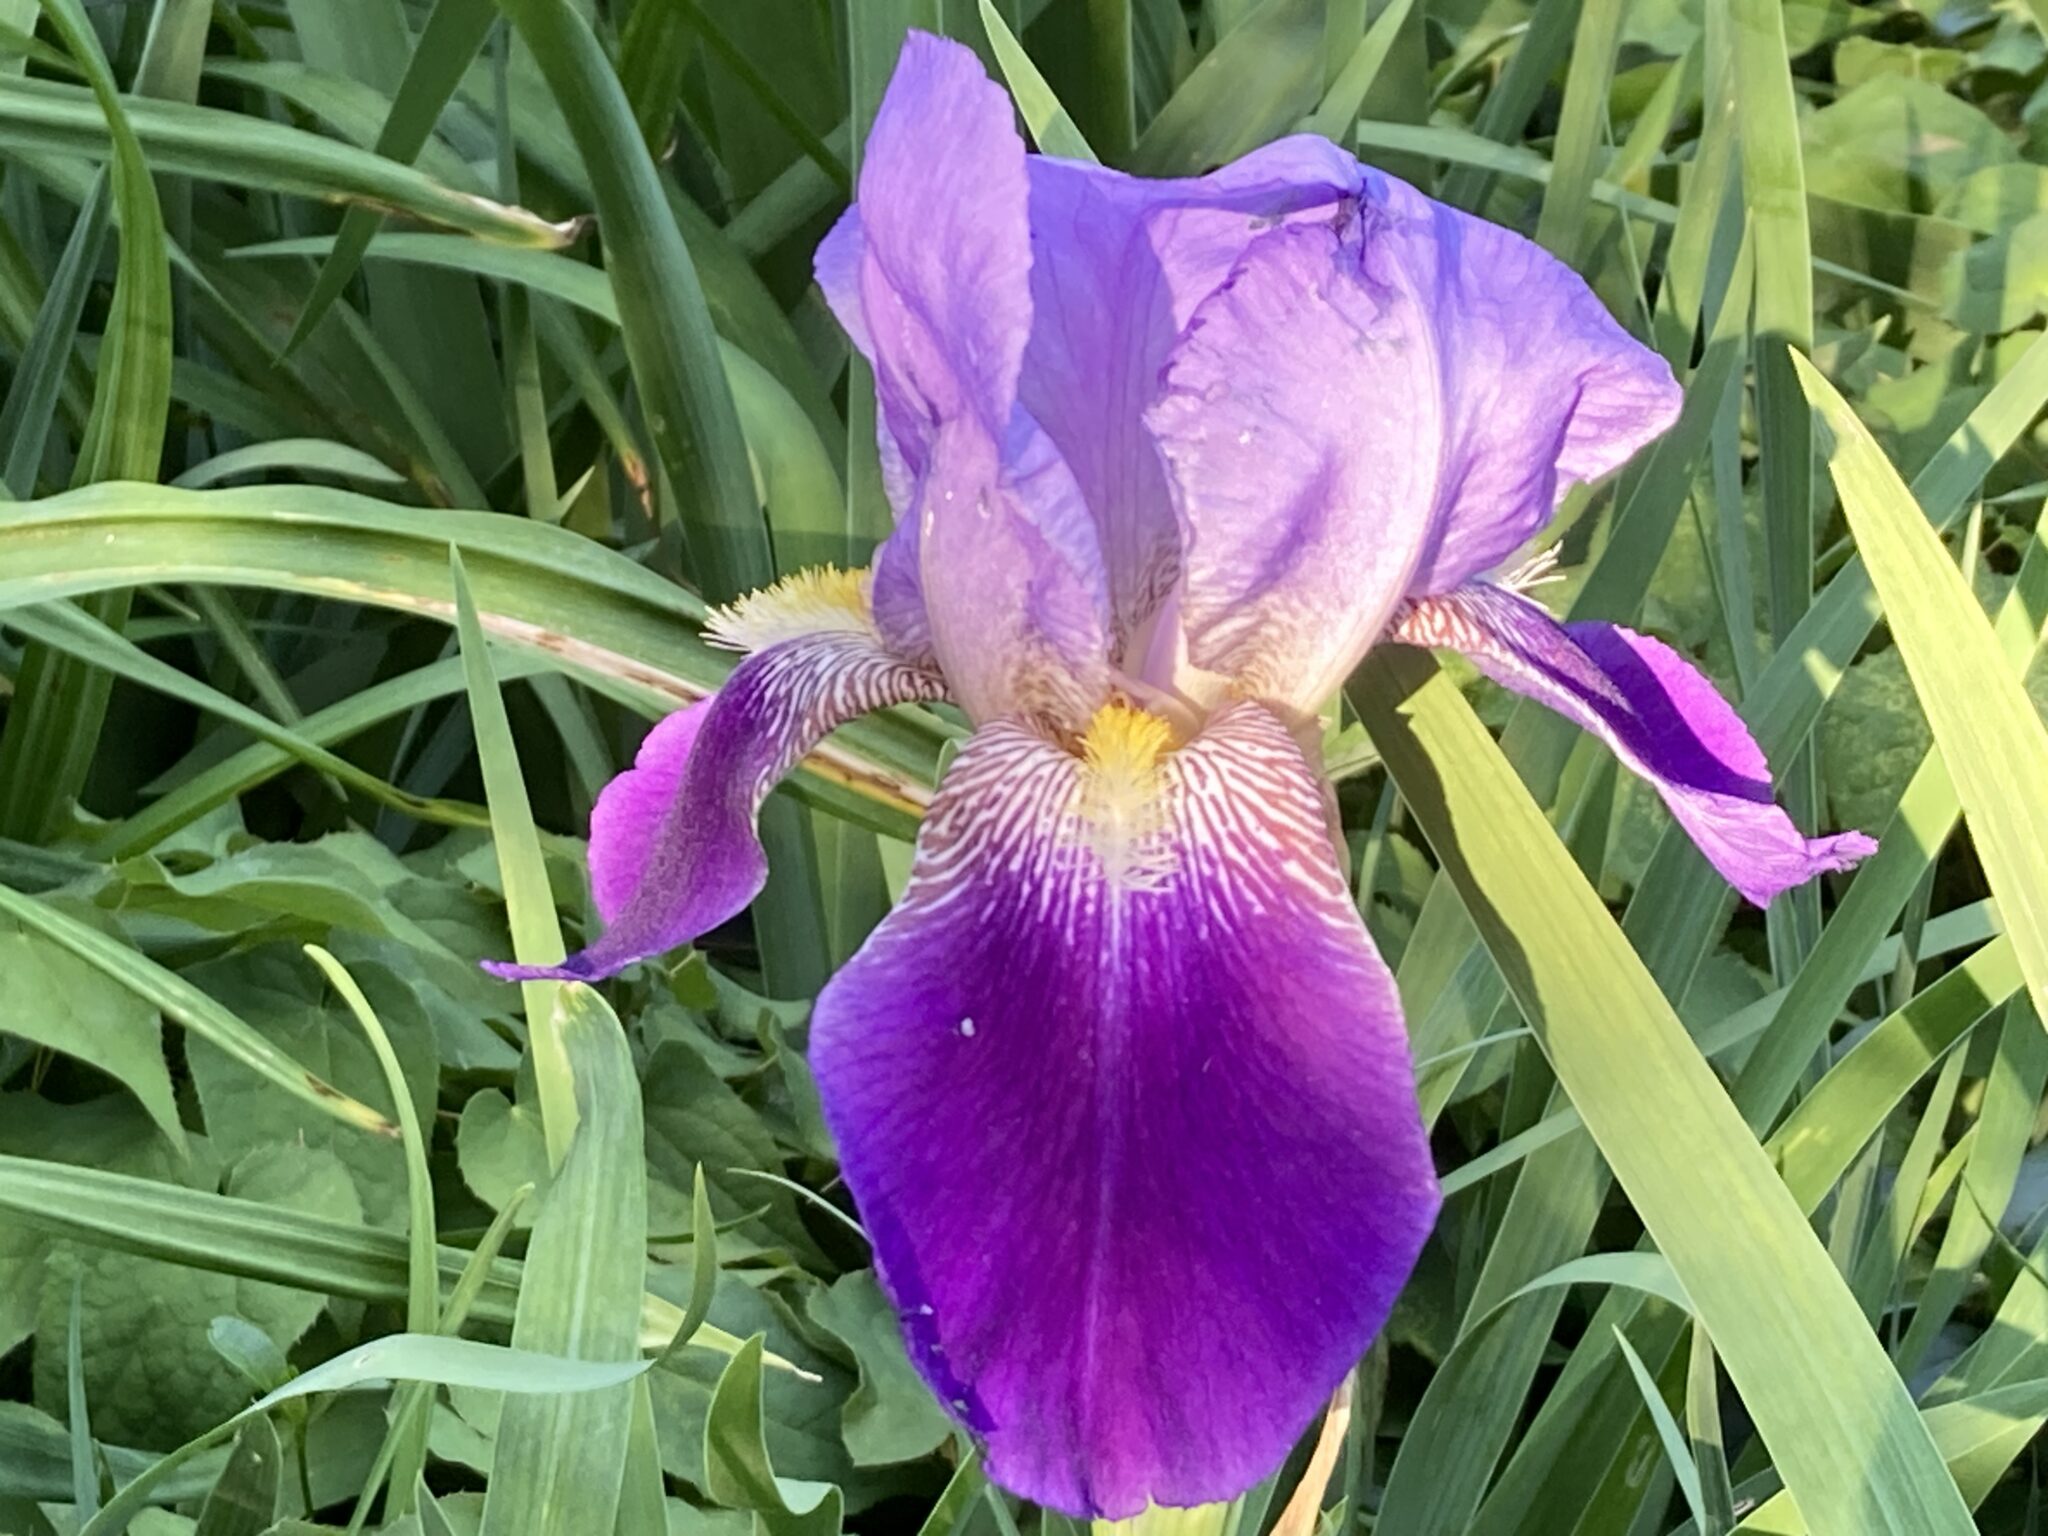 Photo Of The Week: Giant Irises By Annique Boomsma - Amherst Indy